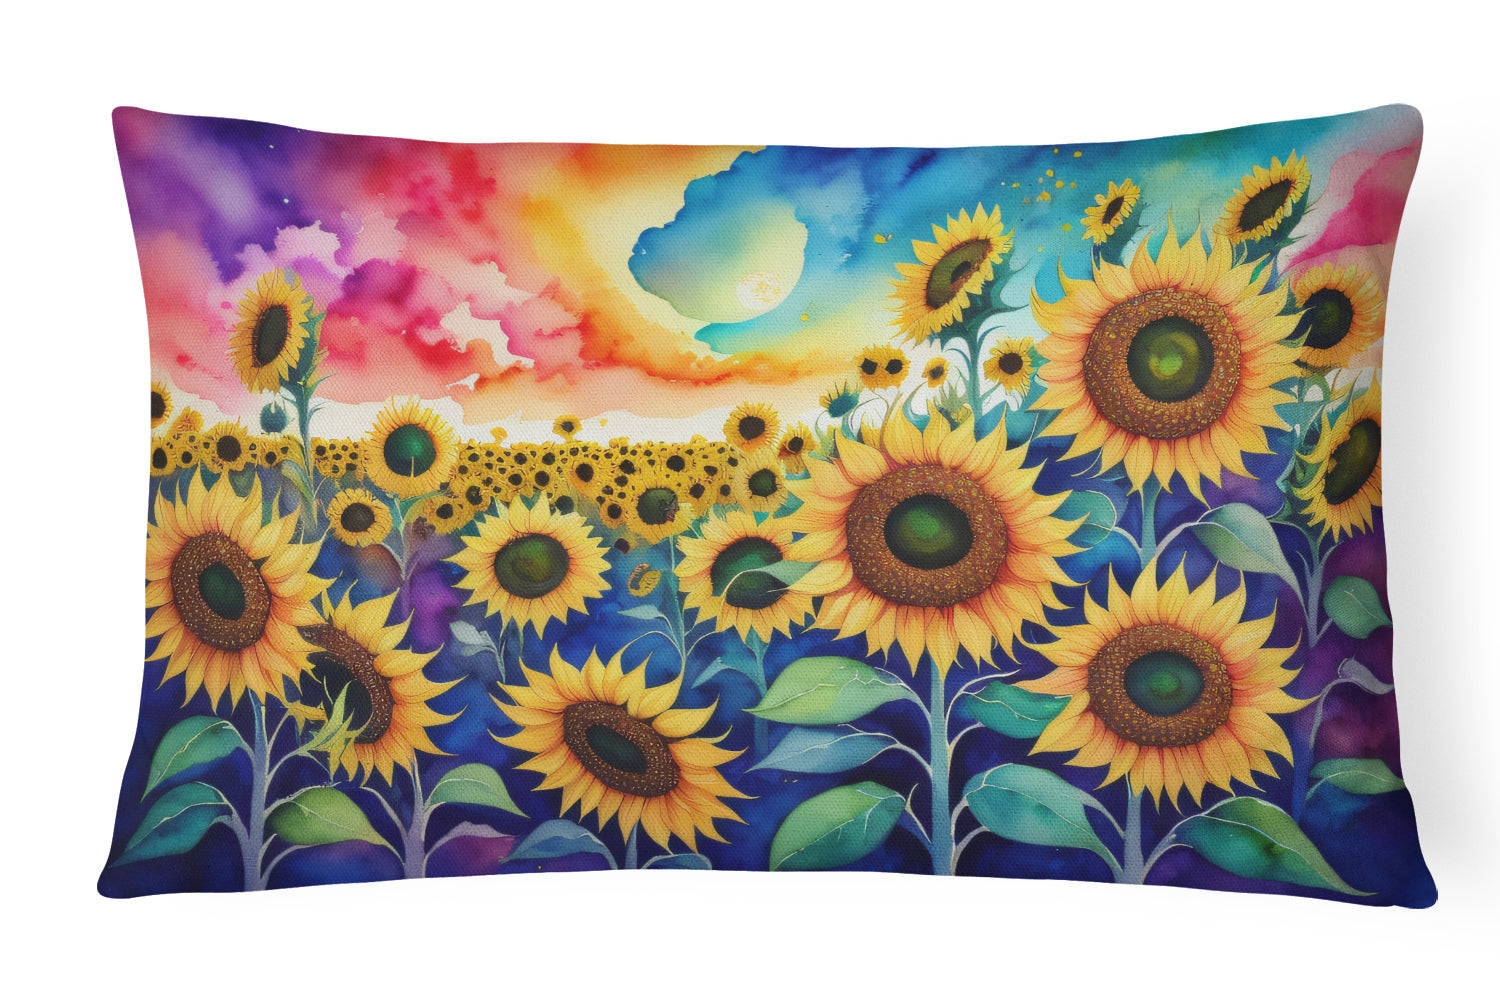 Buy this Sunflowers in Color Fabric Decorative Pillow